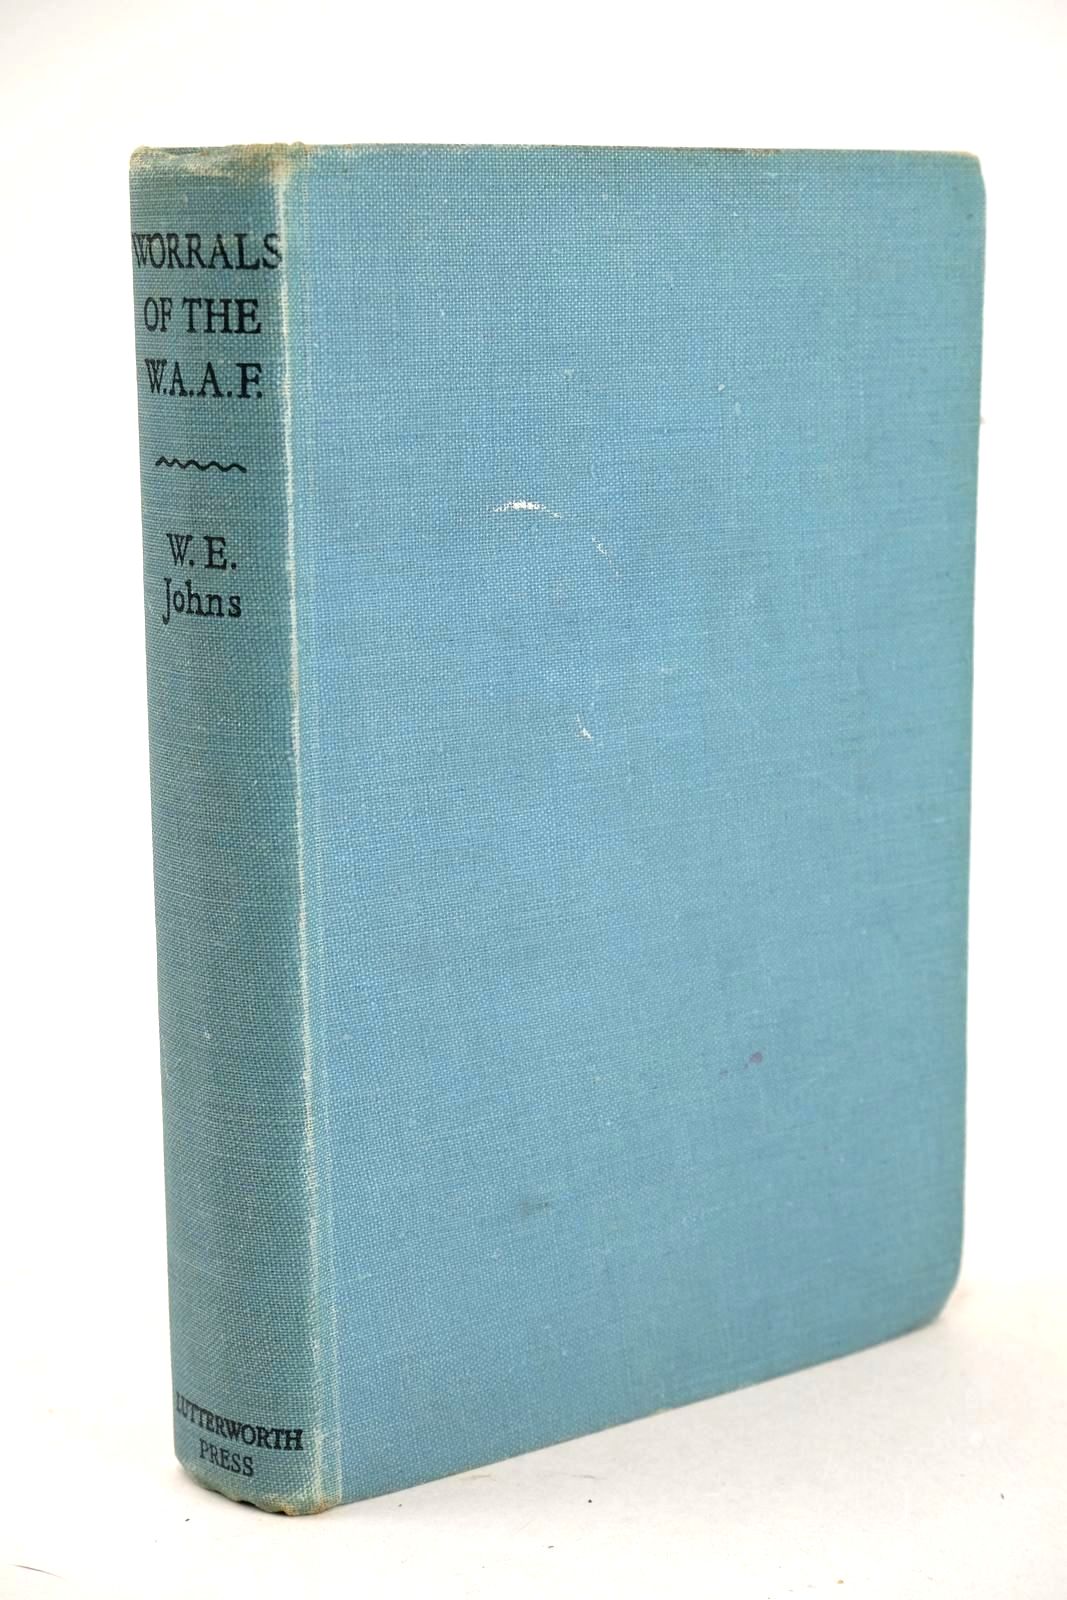 Photo of WORRALS OF THE W.A.A.F. written by Johns, W.E. published by Lutterworth Press (STOCK CODE: 1326383)  for sale by Stella & Rose's Books